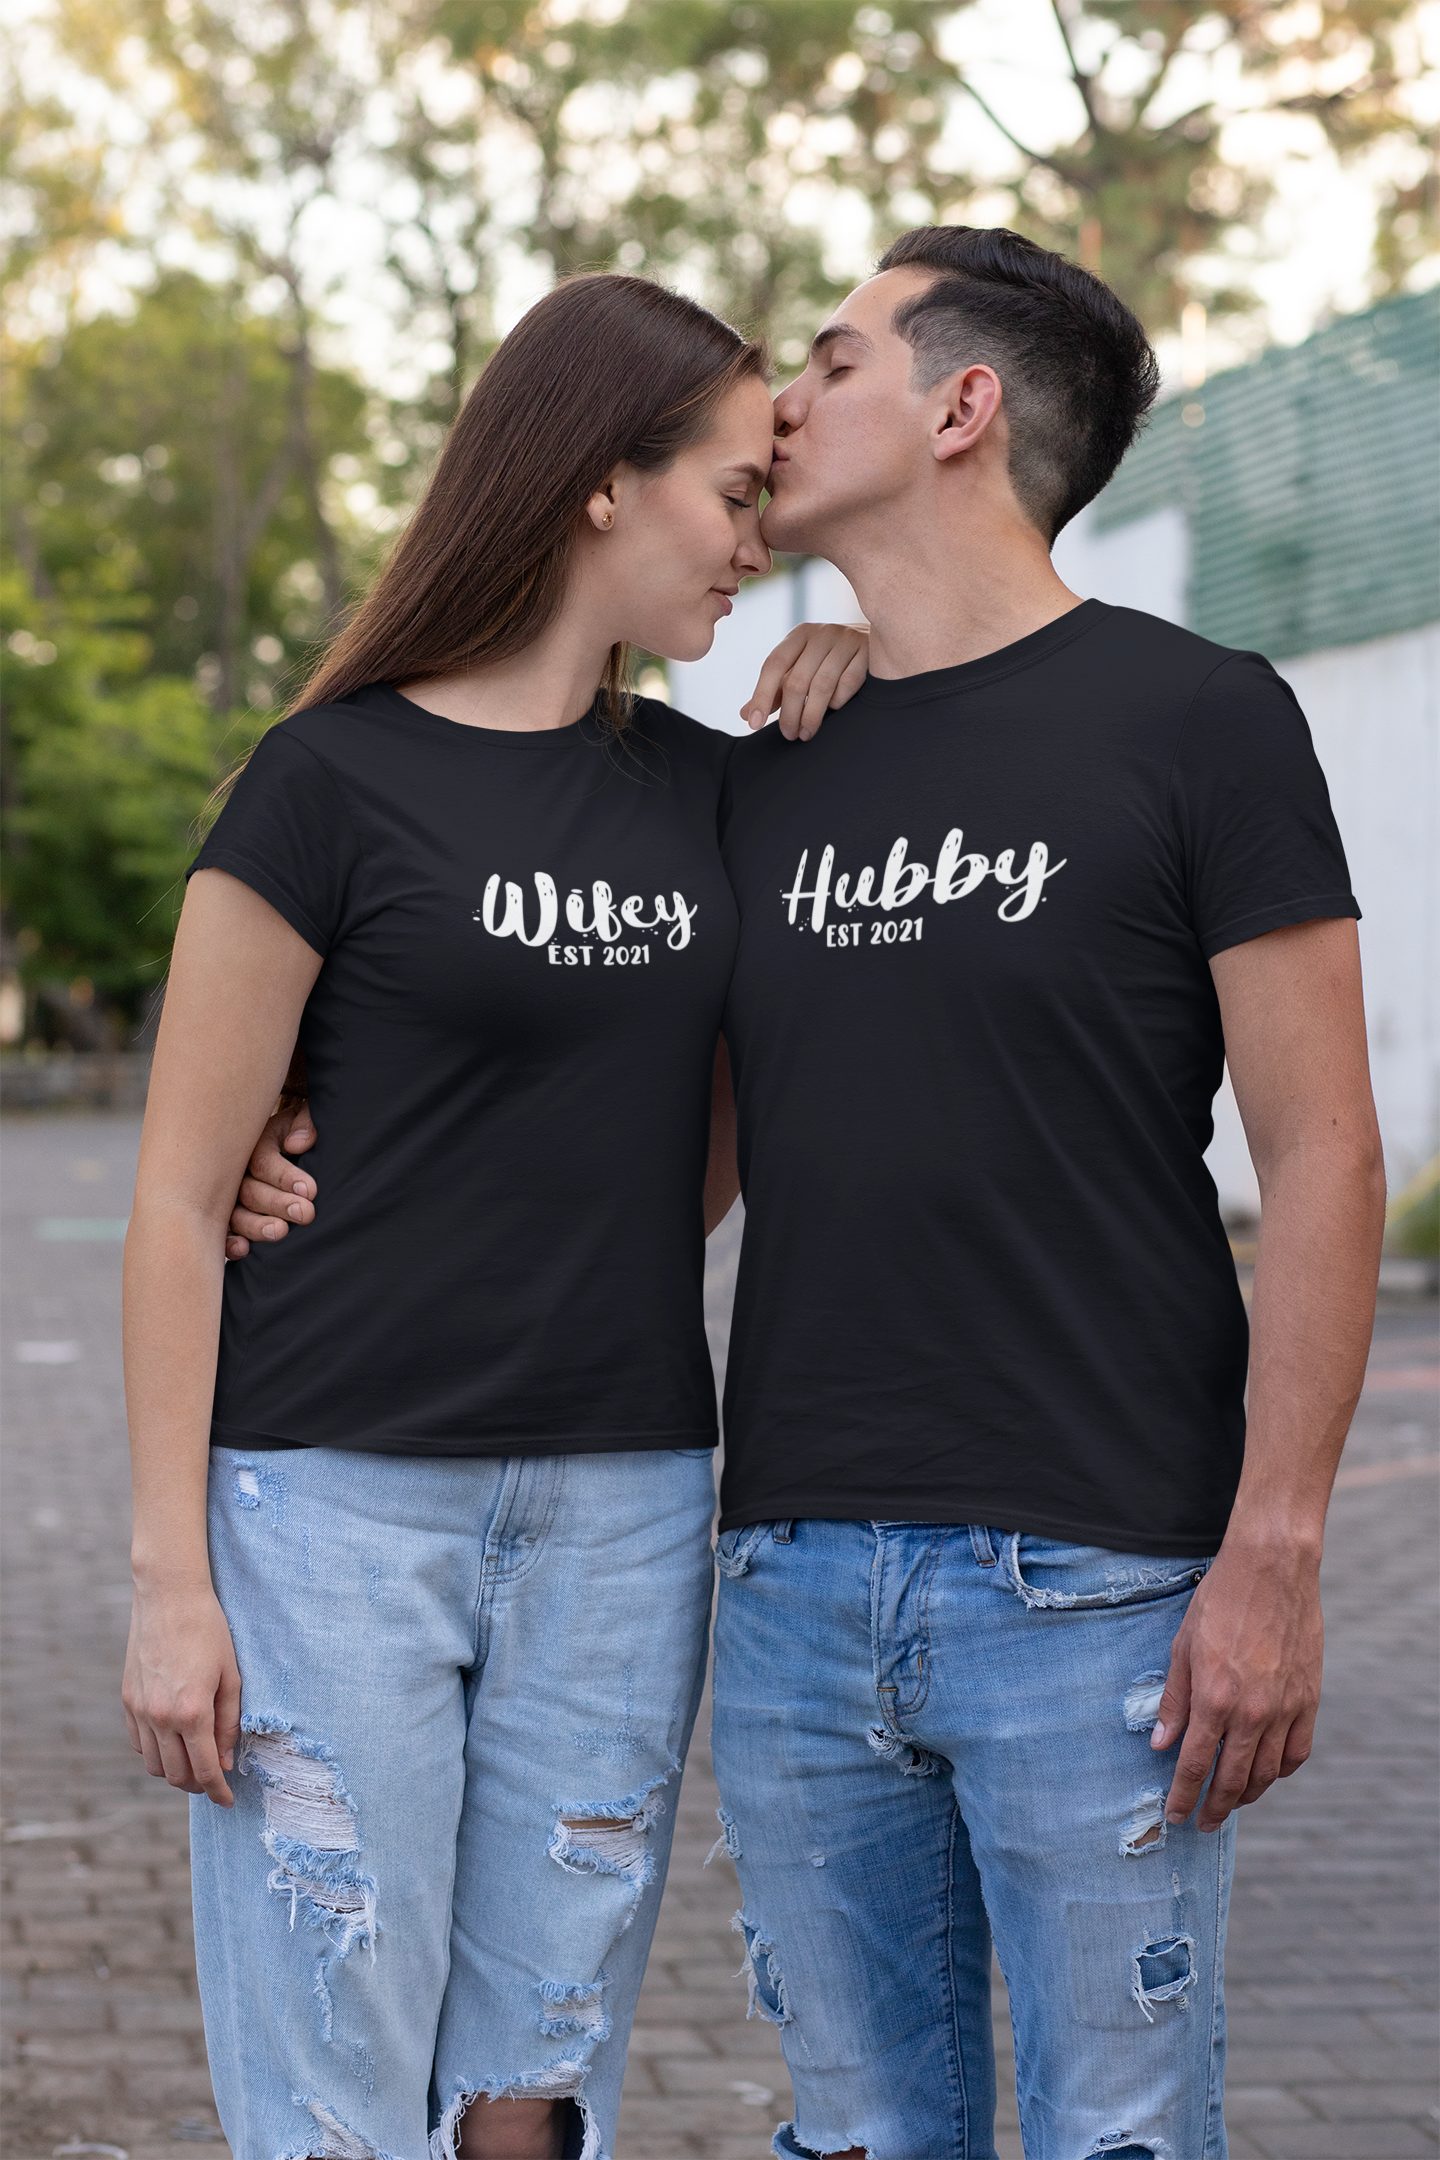 Hubby Wifey Est 2021 Couple Half Sleeves T-Shirts -FunkyTradition